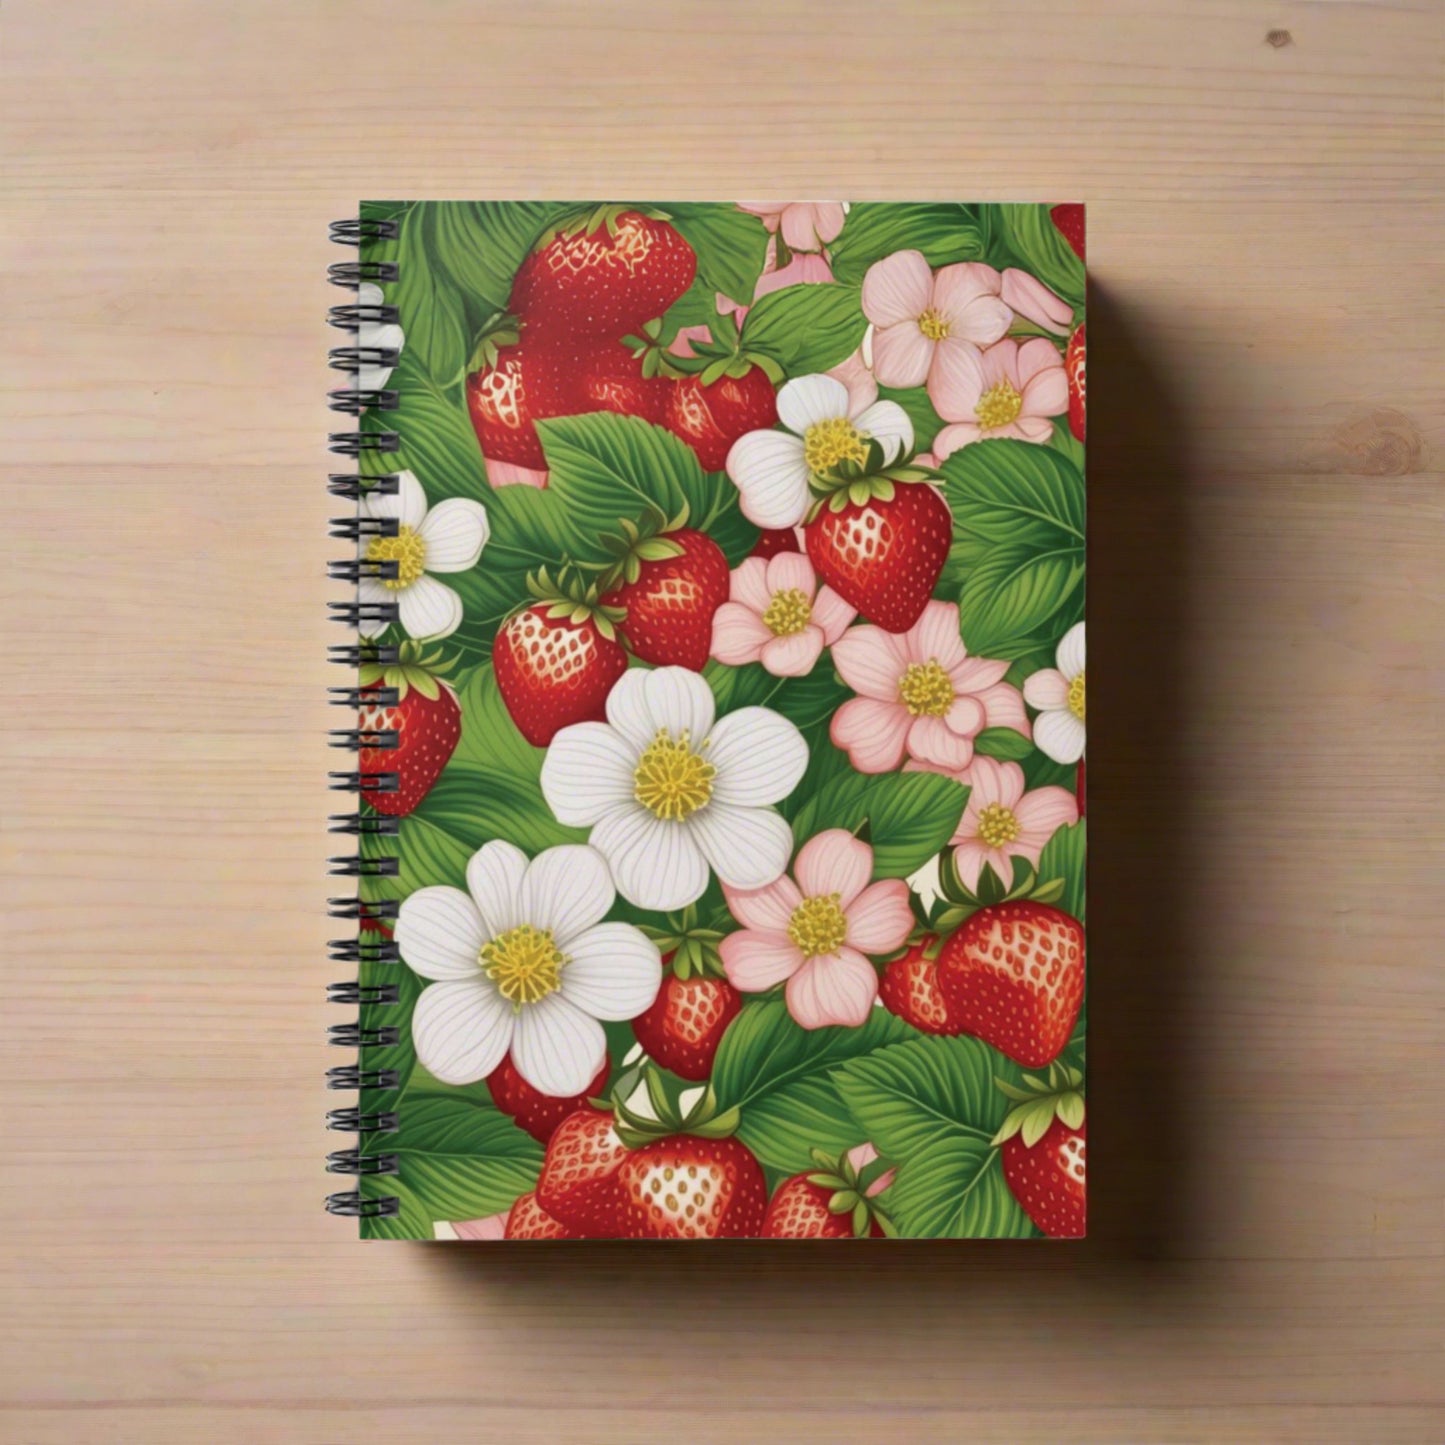 Strawberry Dreams Design Spiral Notebook - Ruled Lines